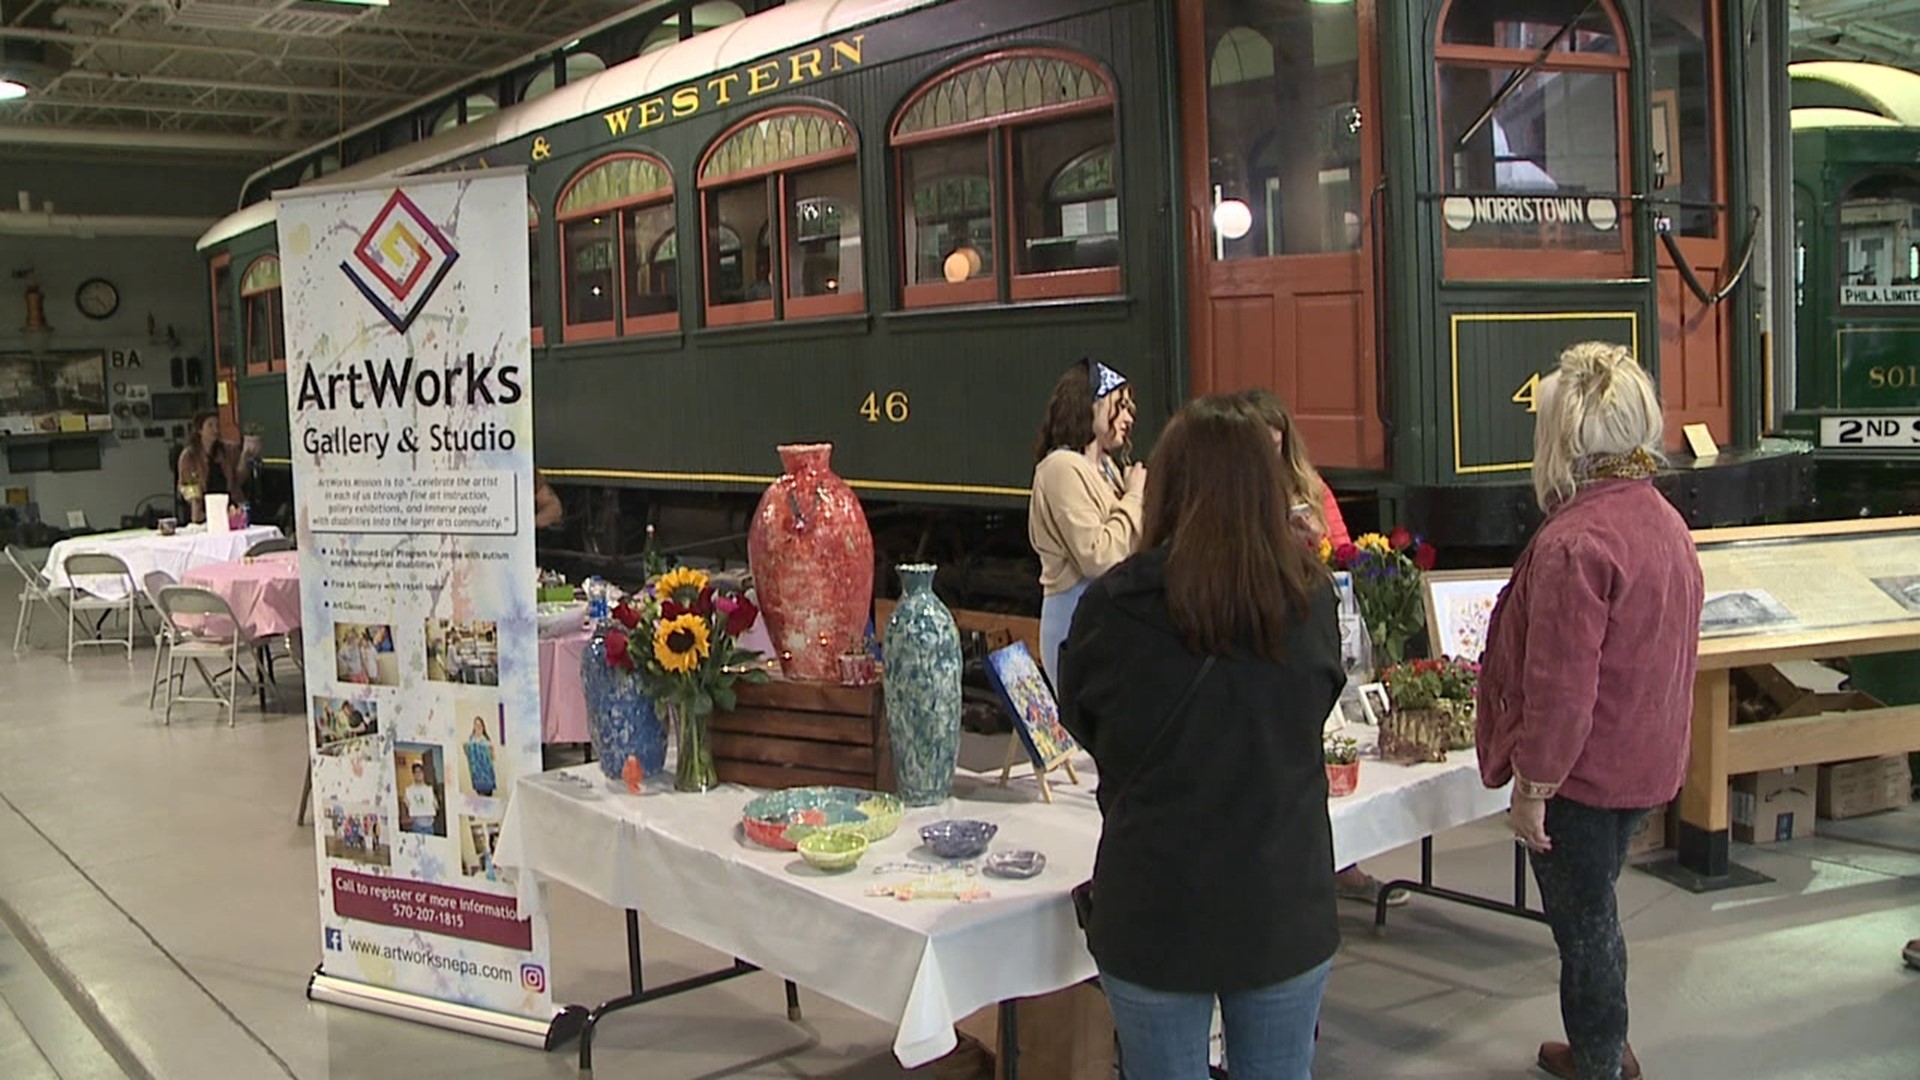 The plant sale was held at the Electric City Trolley Museum from 11 a.m. to 1 p.m. Saturday.